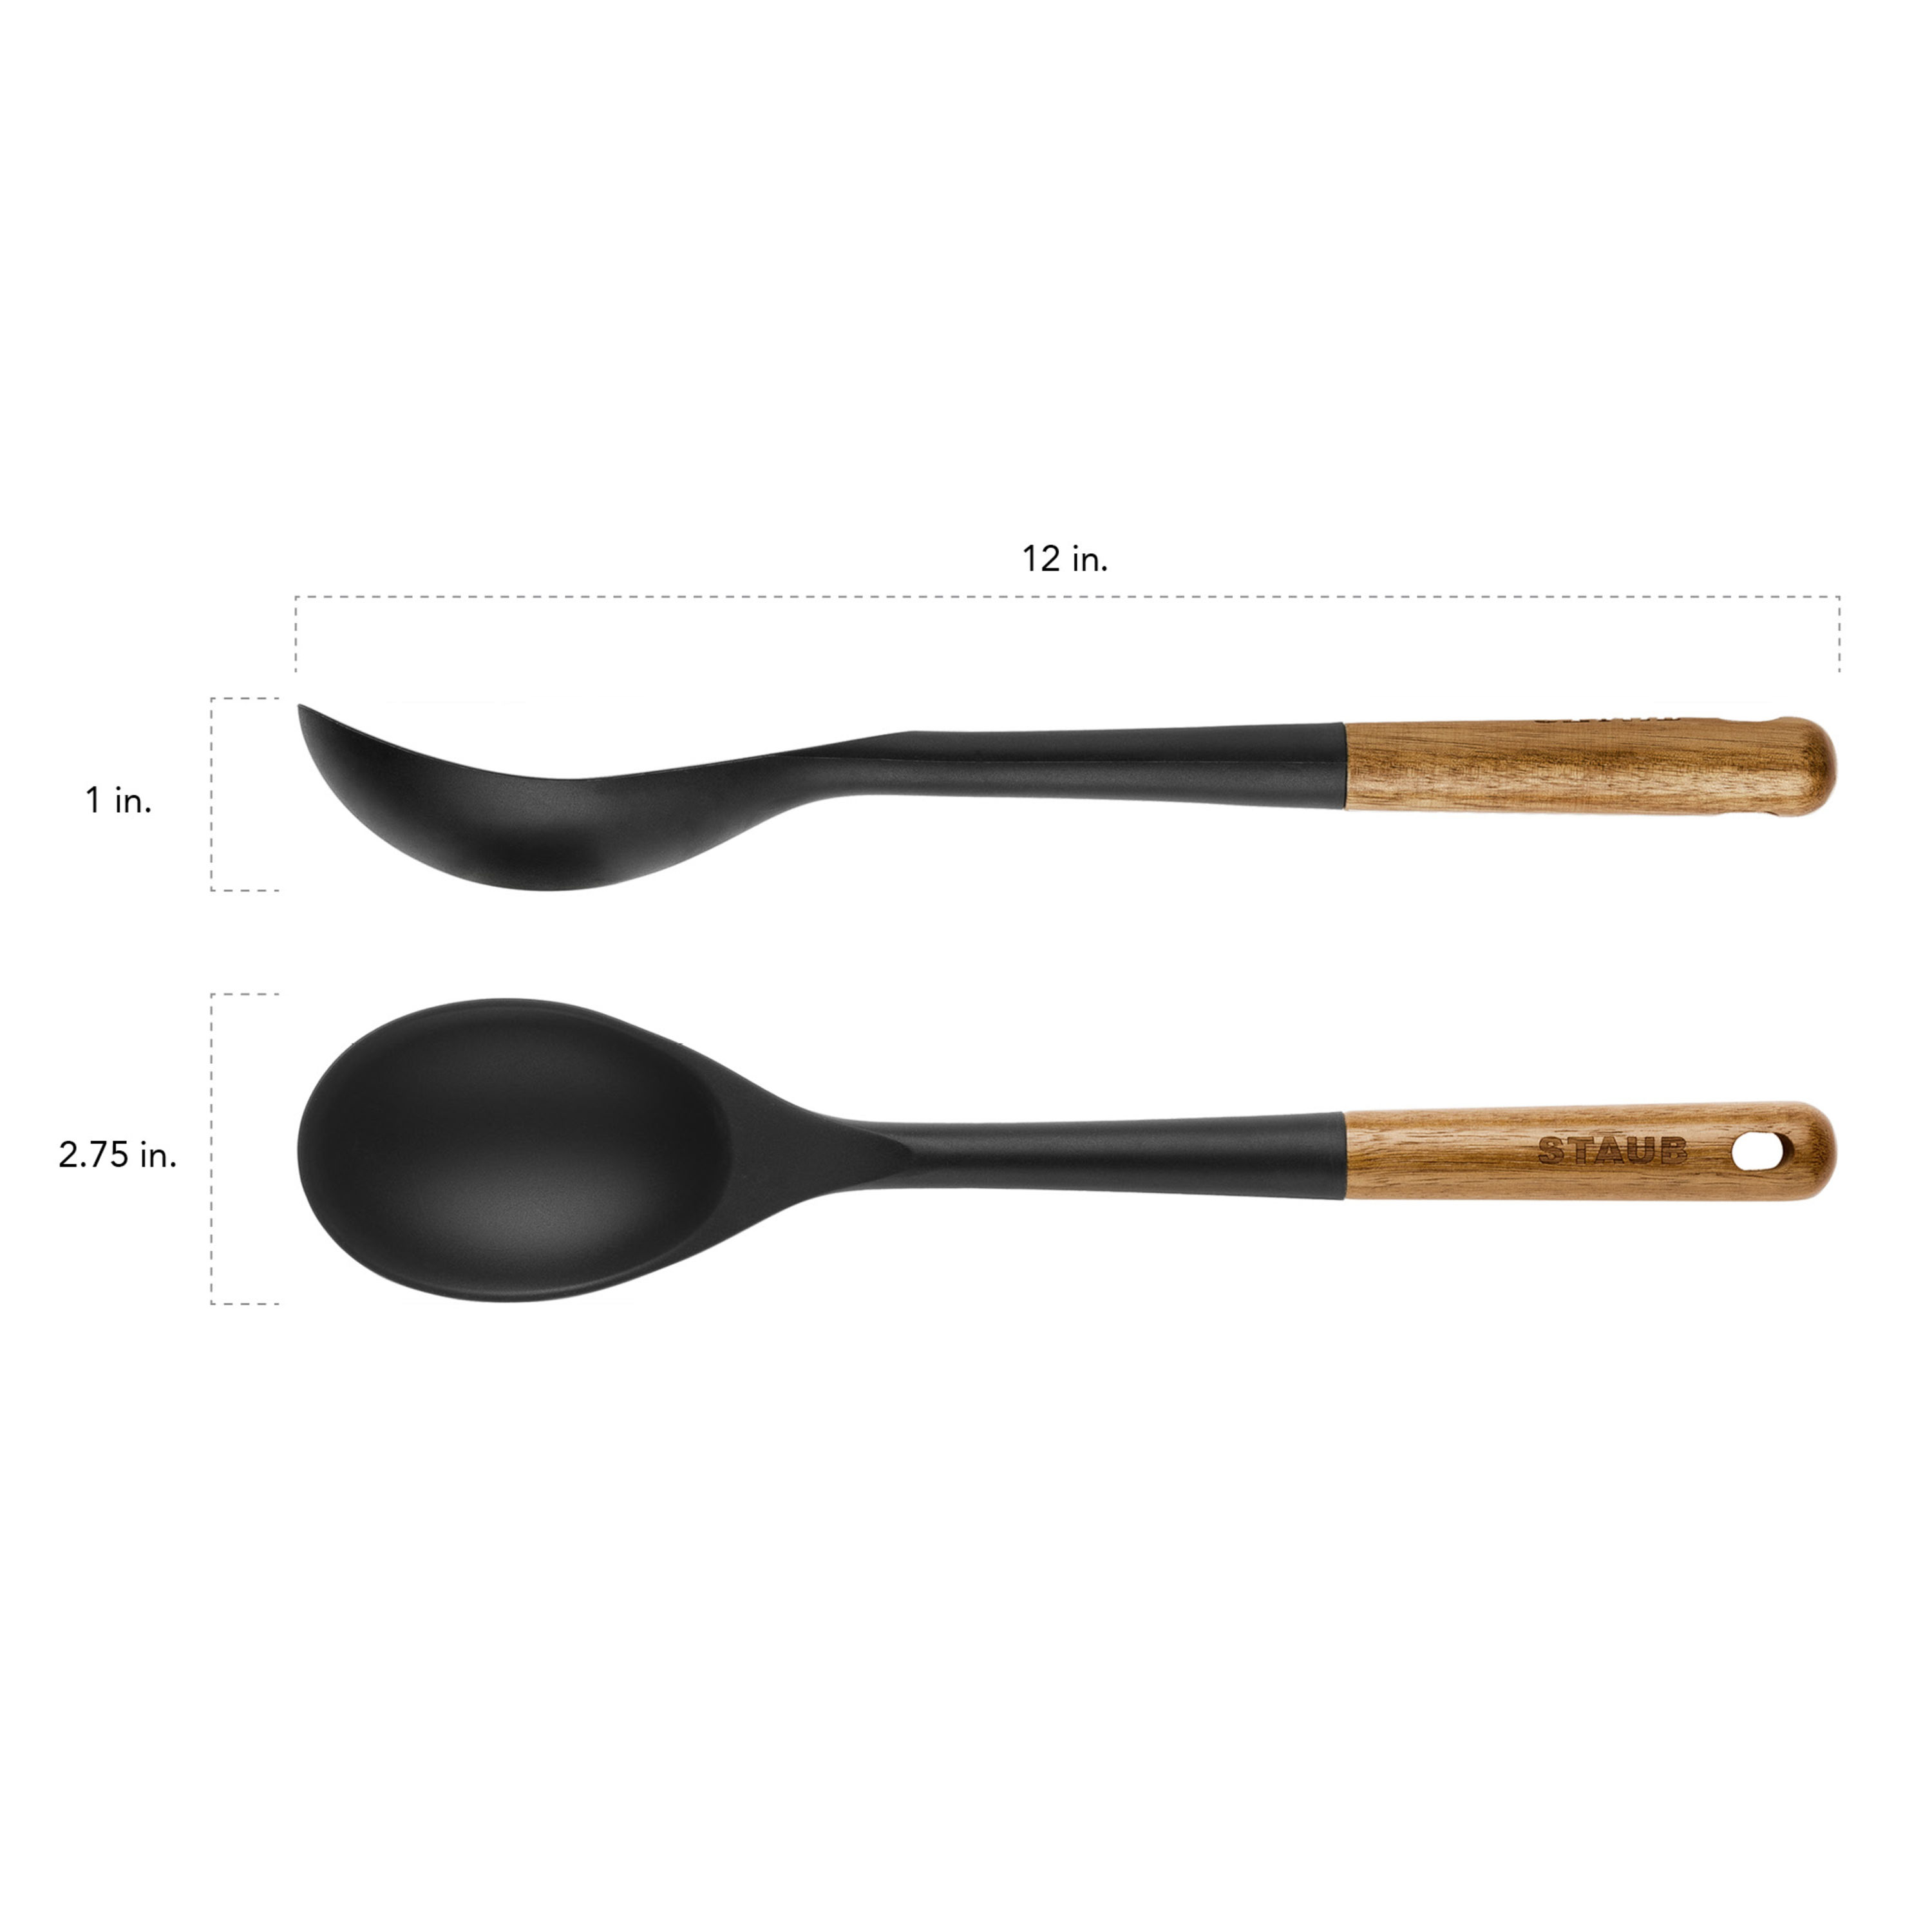 Rustic Black Silicone Baking Utensils with Wooden Handles